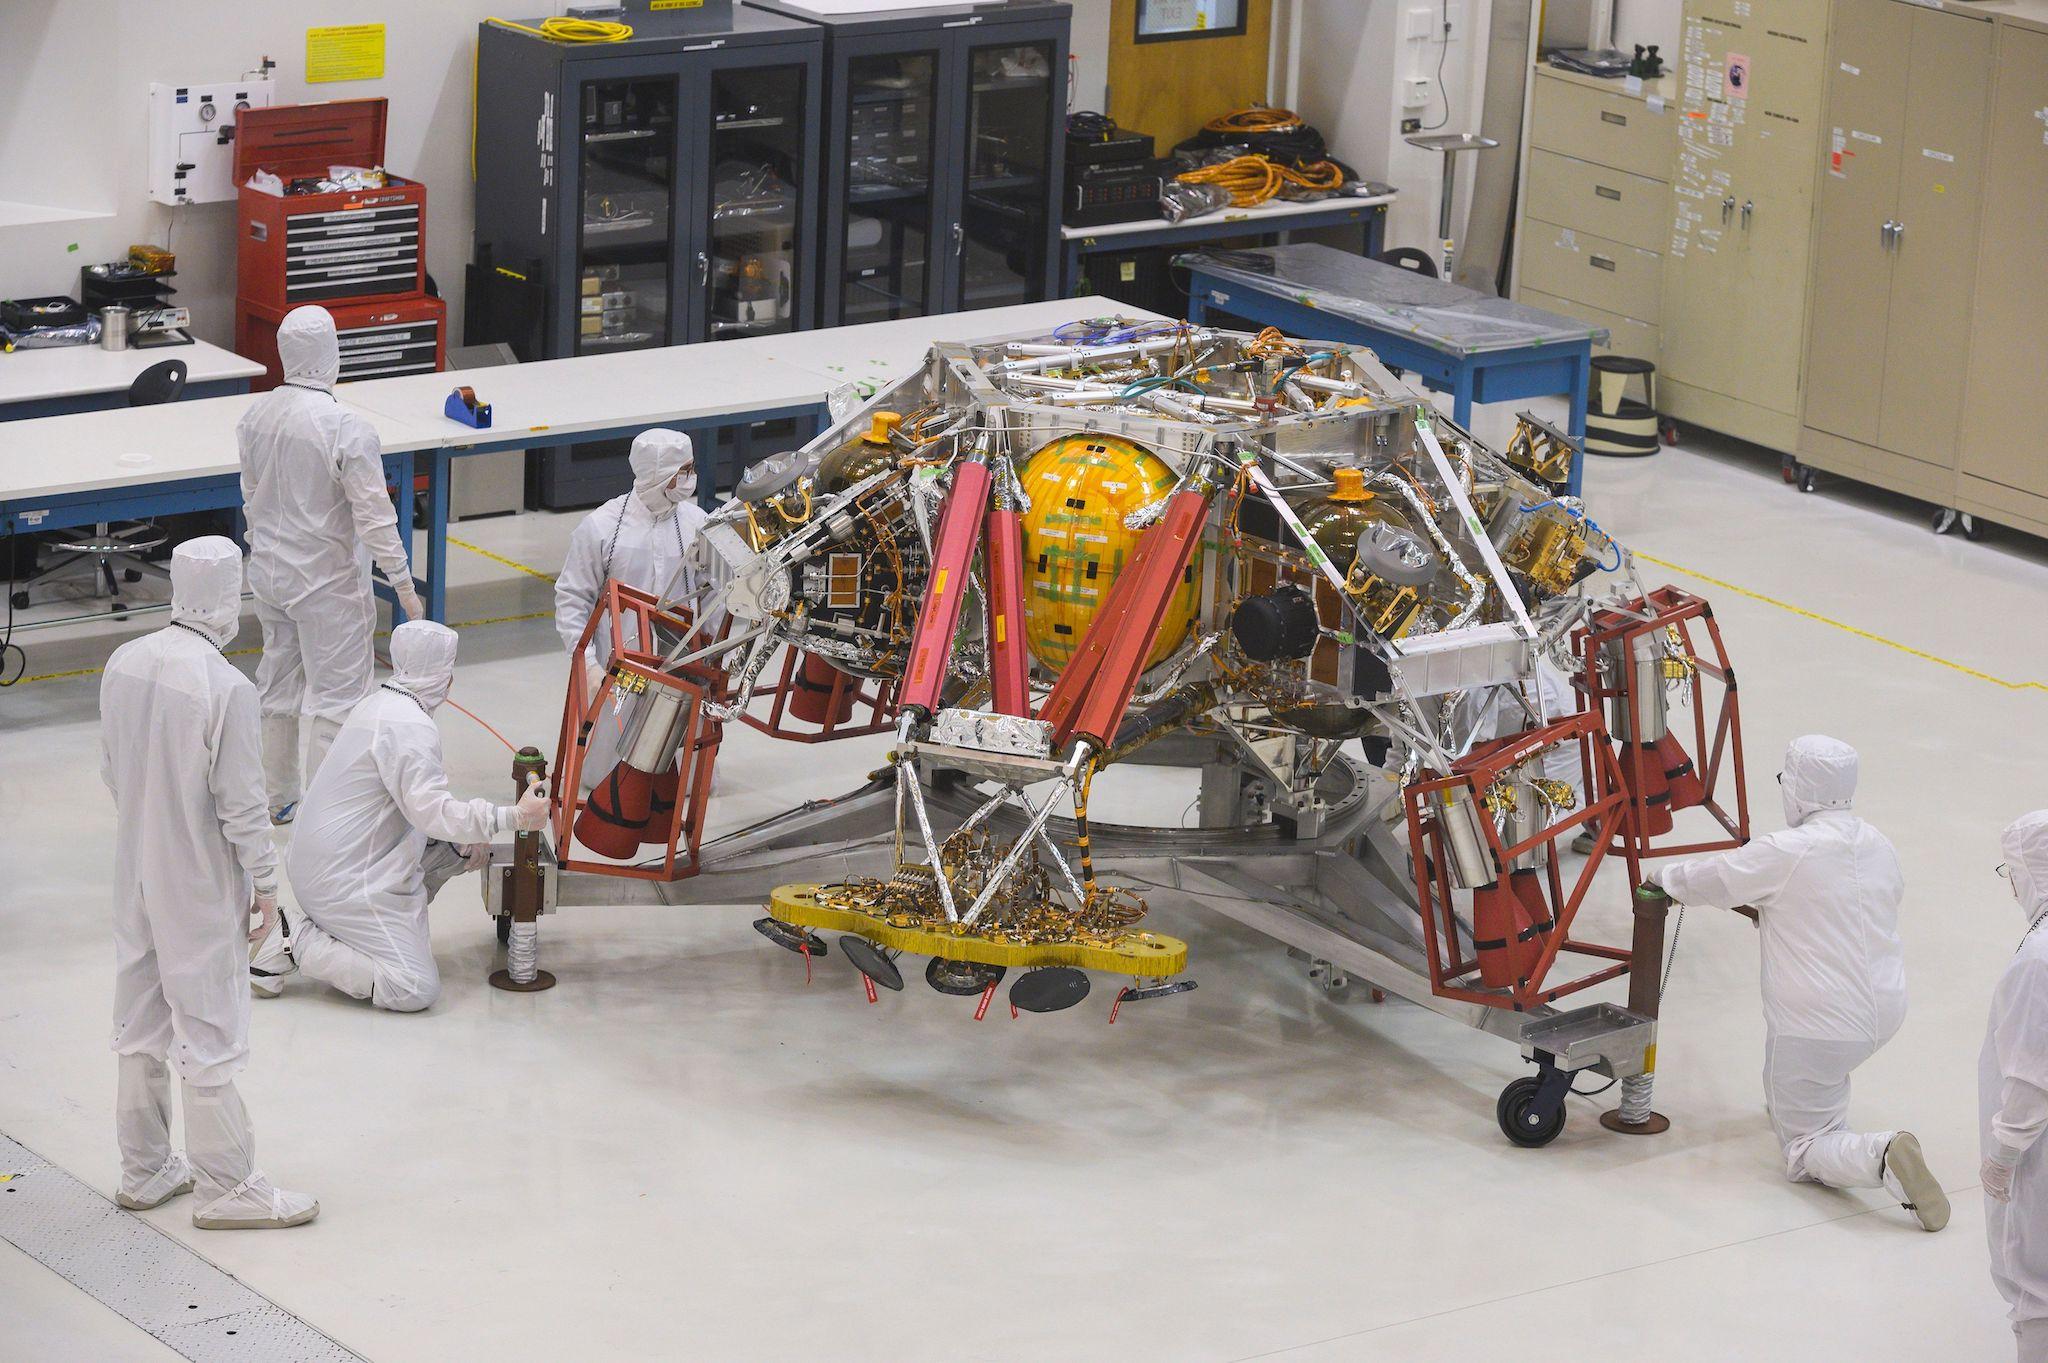 NASA engineers and technicians reposition the Mars 2020 spacecraft descent stage December 27, 2019 during a media tour of the spacecraft assembly area clean room at NASA's Jet Propulsion Laboratory in Pasadena, California